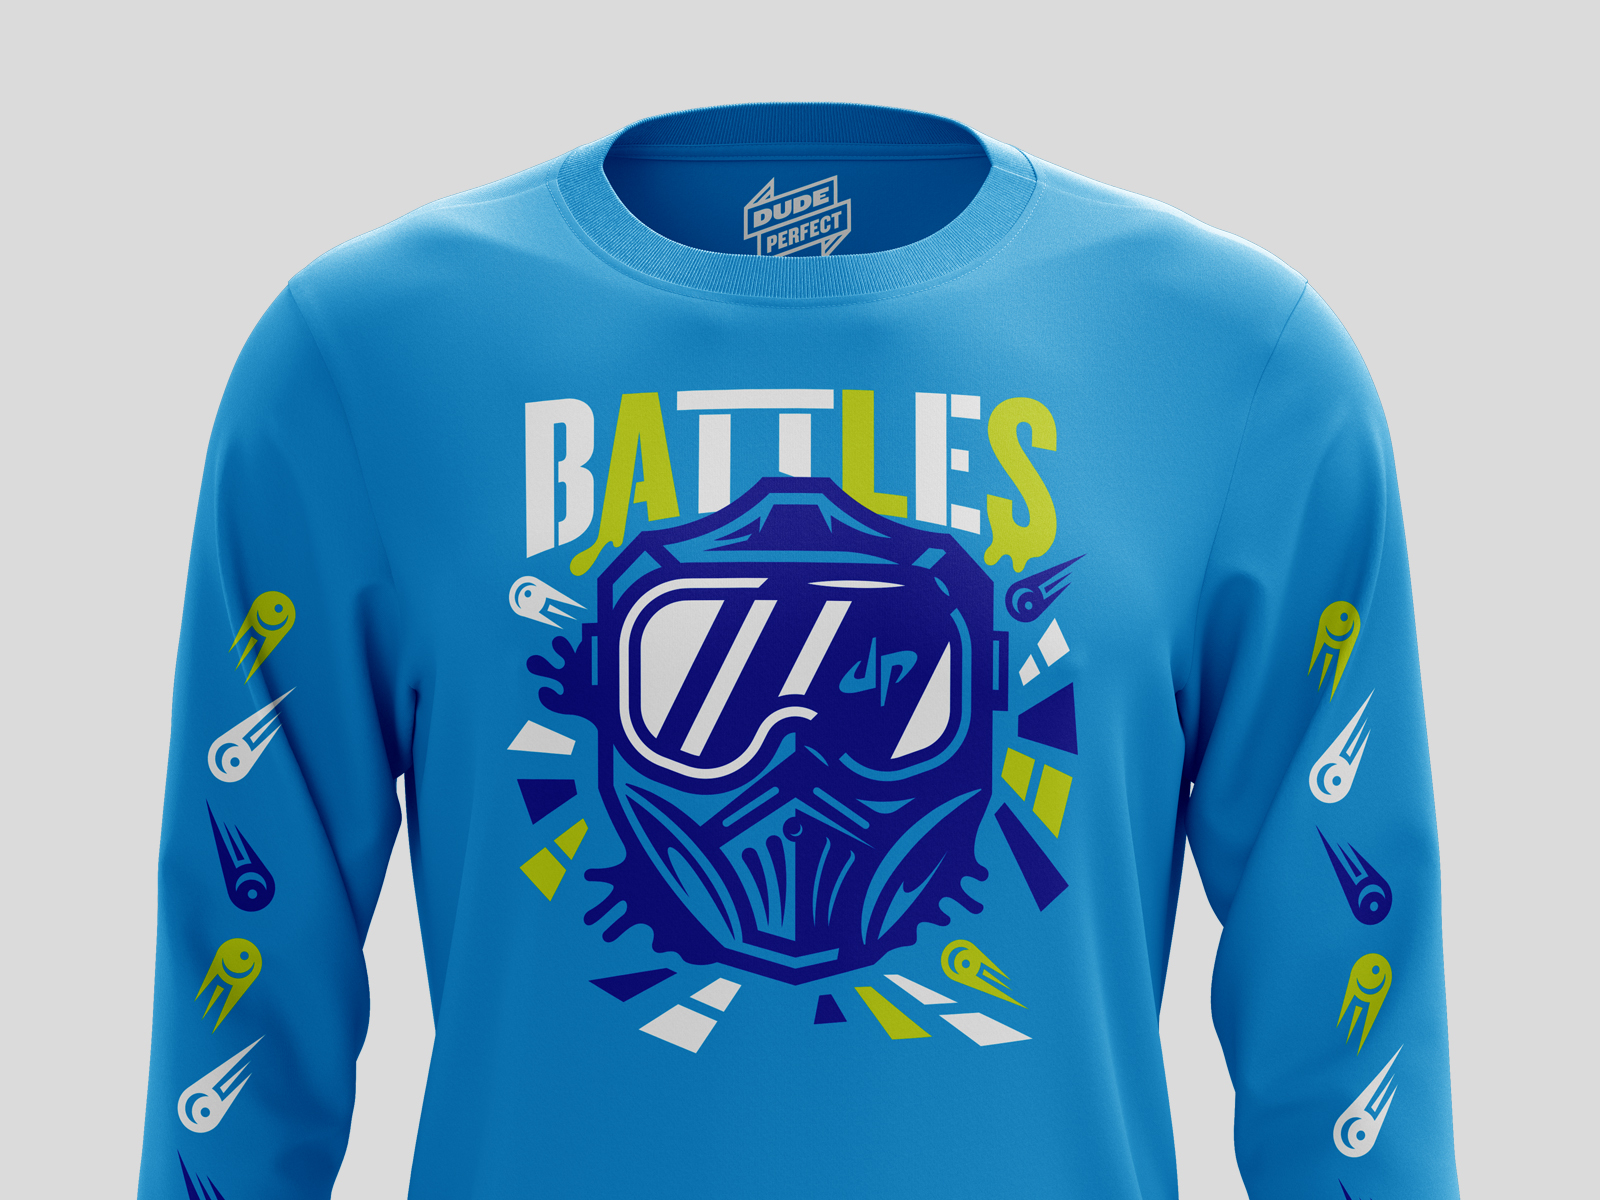 Illustration apparel battles dude perfect illustration invisible creature paint ball rivals group